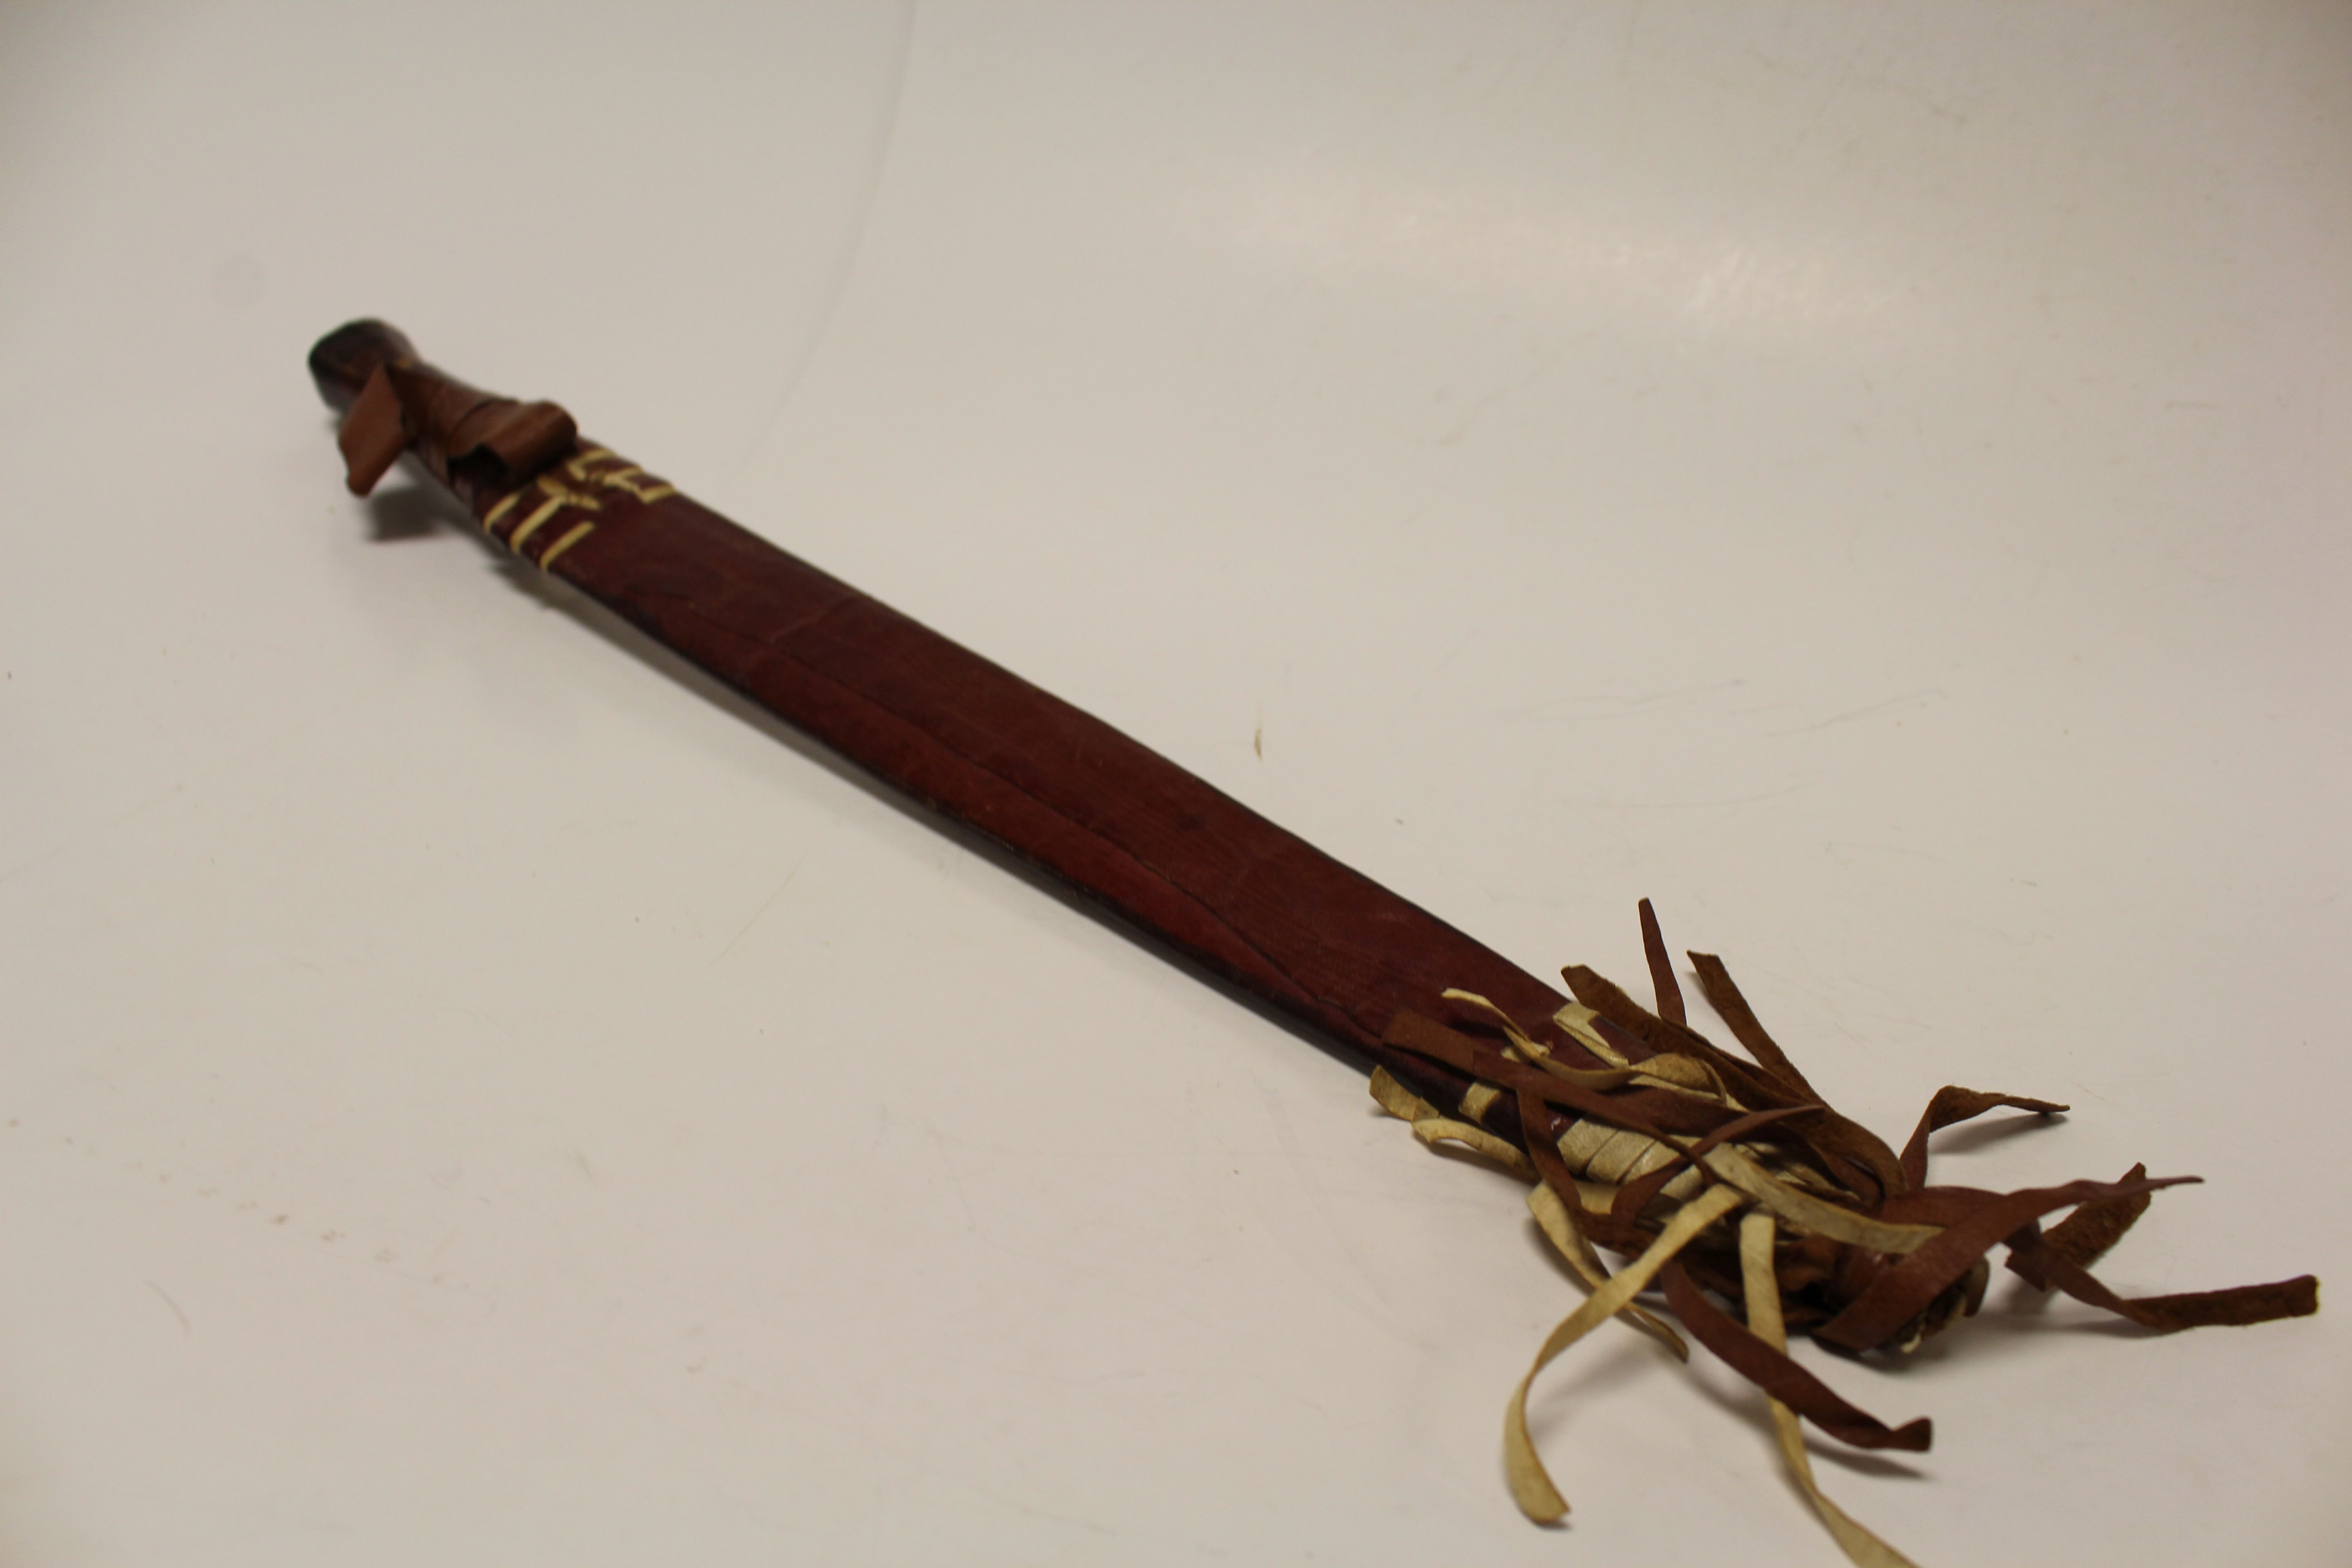 African tribal style decorative short sword with leather sheath and tassels, length approximately - Image 2 of 2